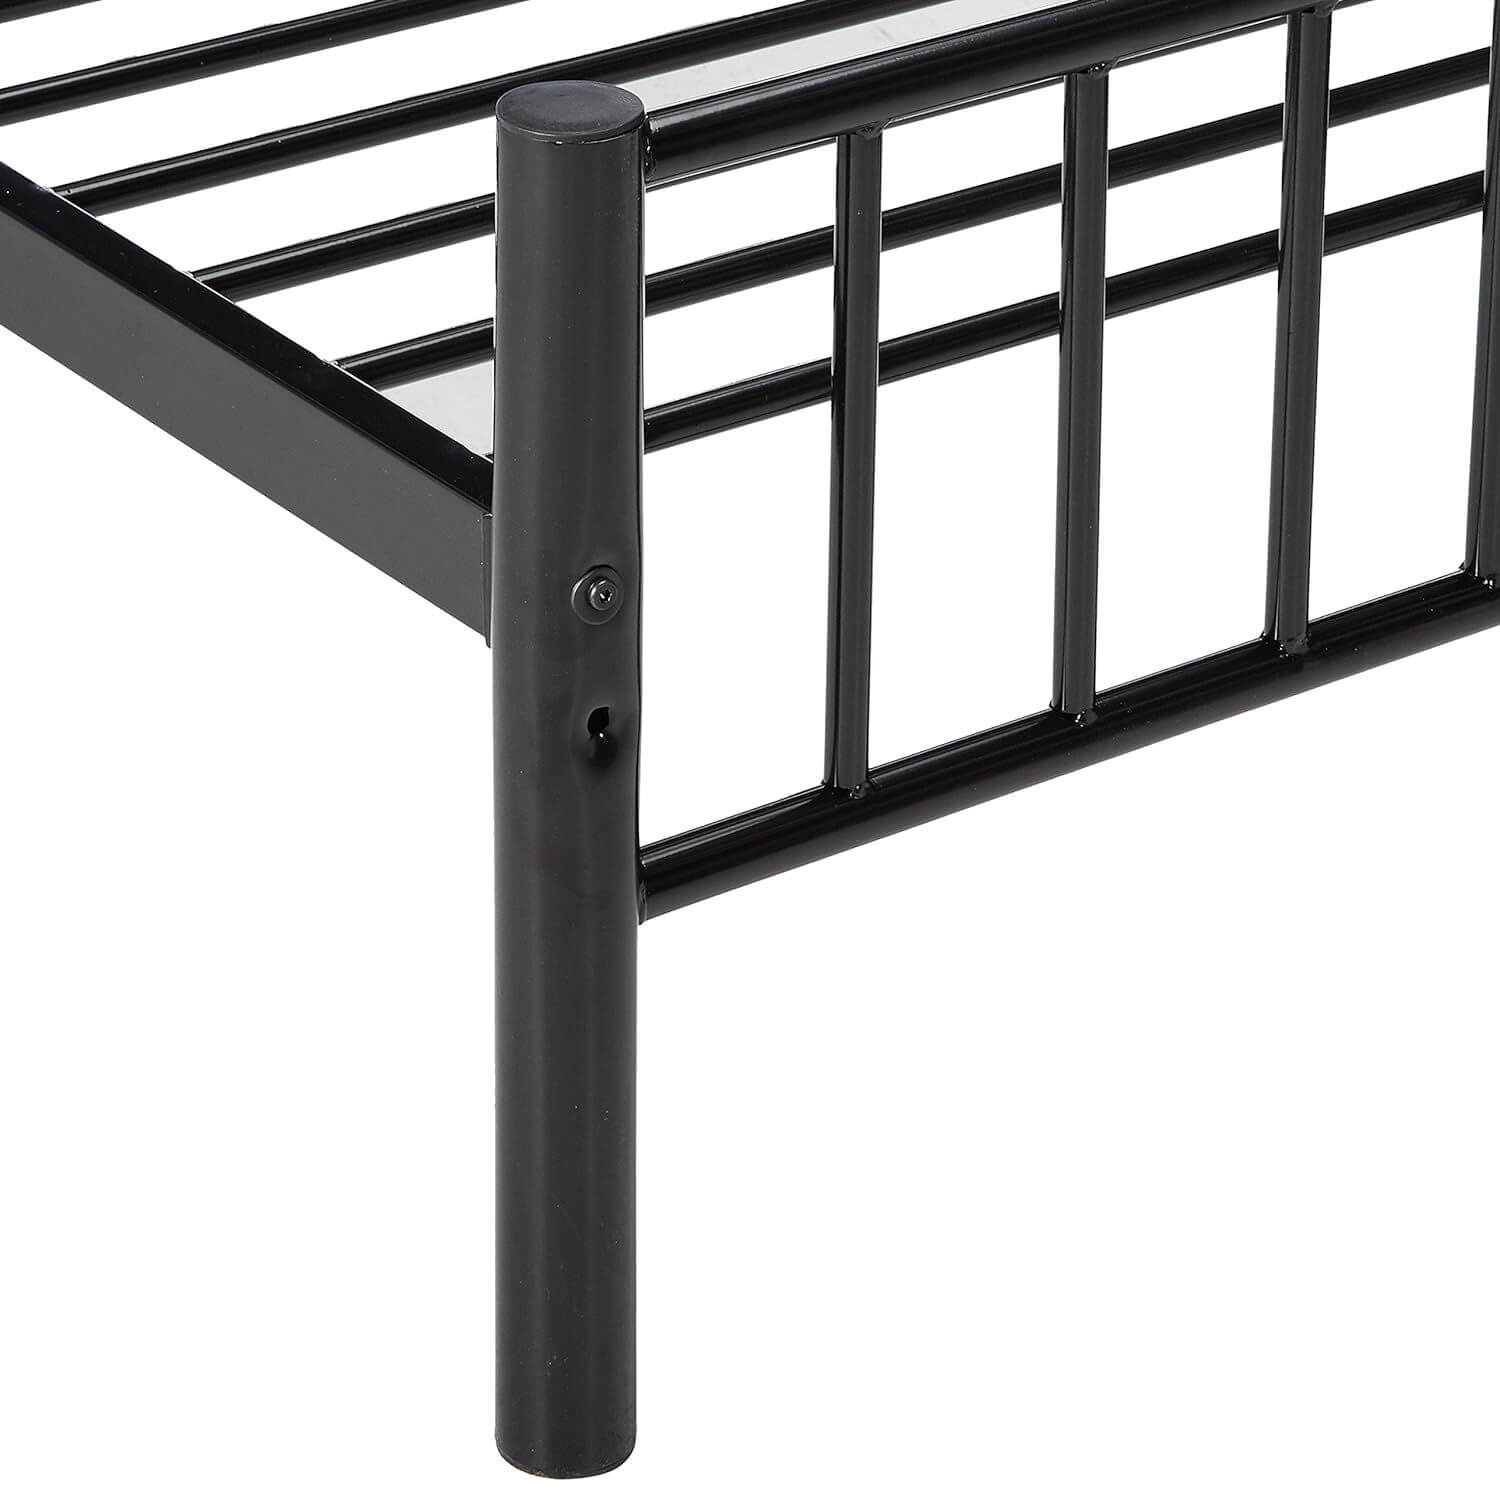 ACME Cailyn Full Metal Bed with Headboard | Black